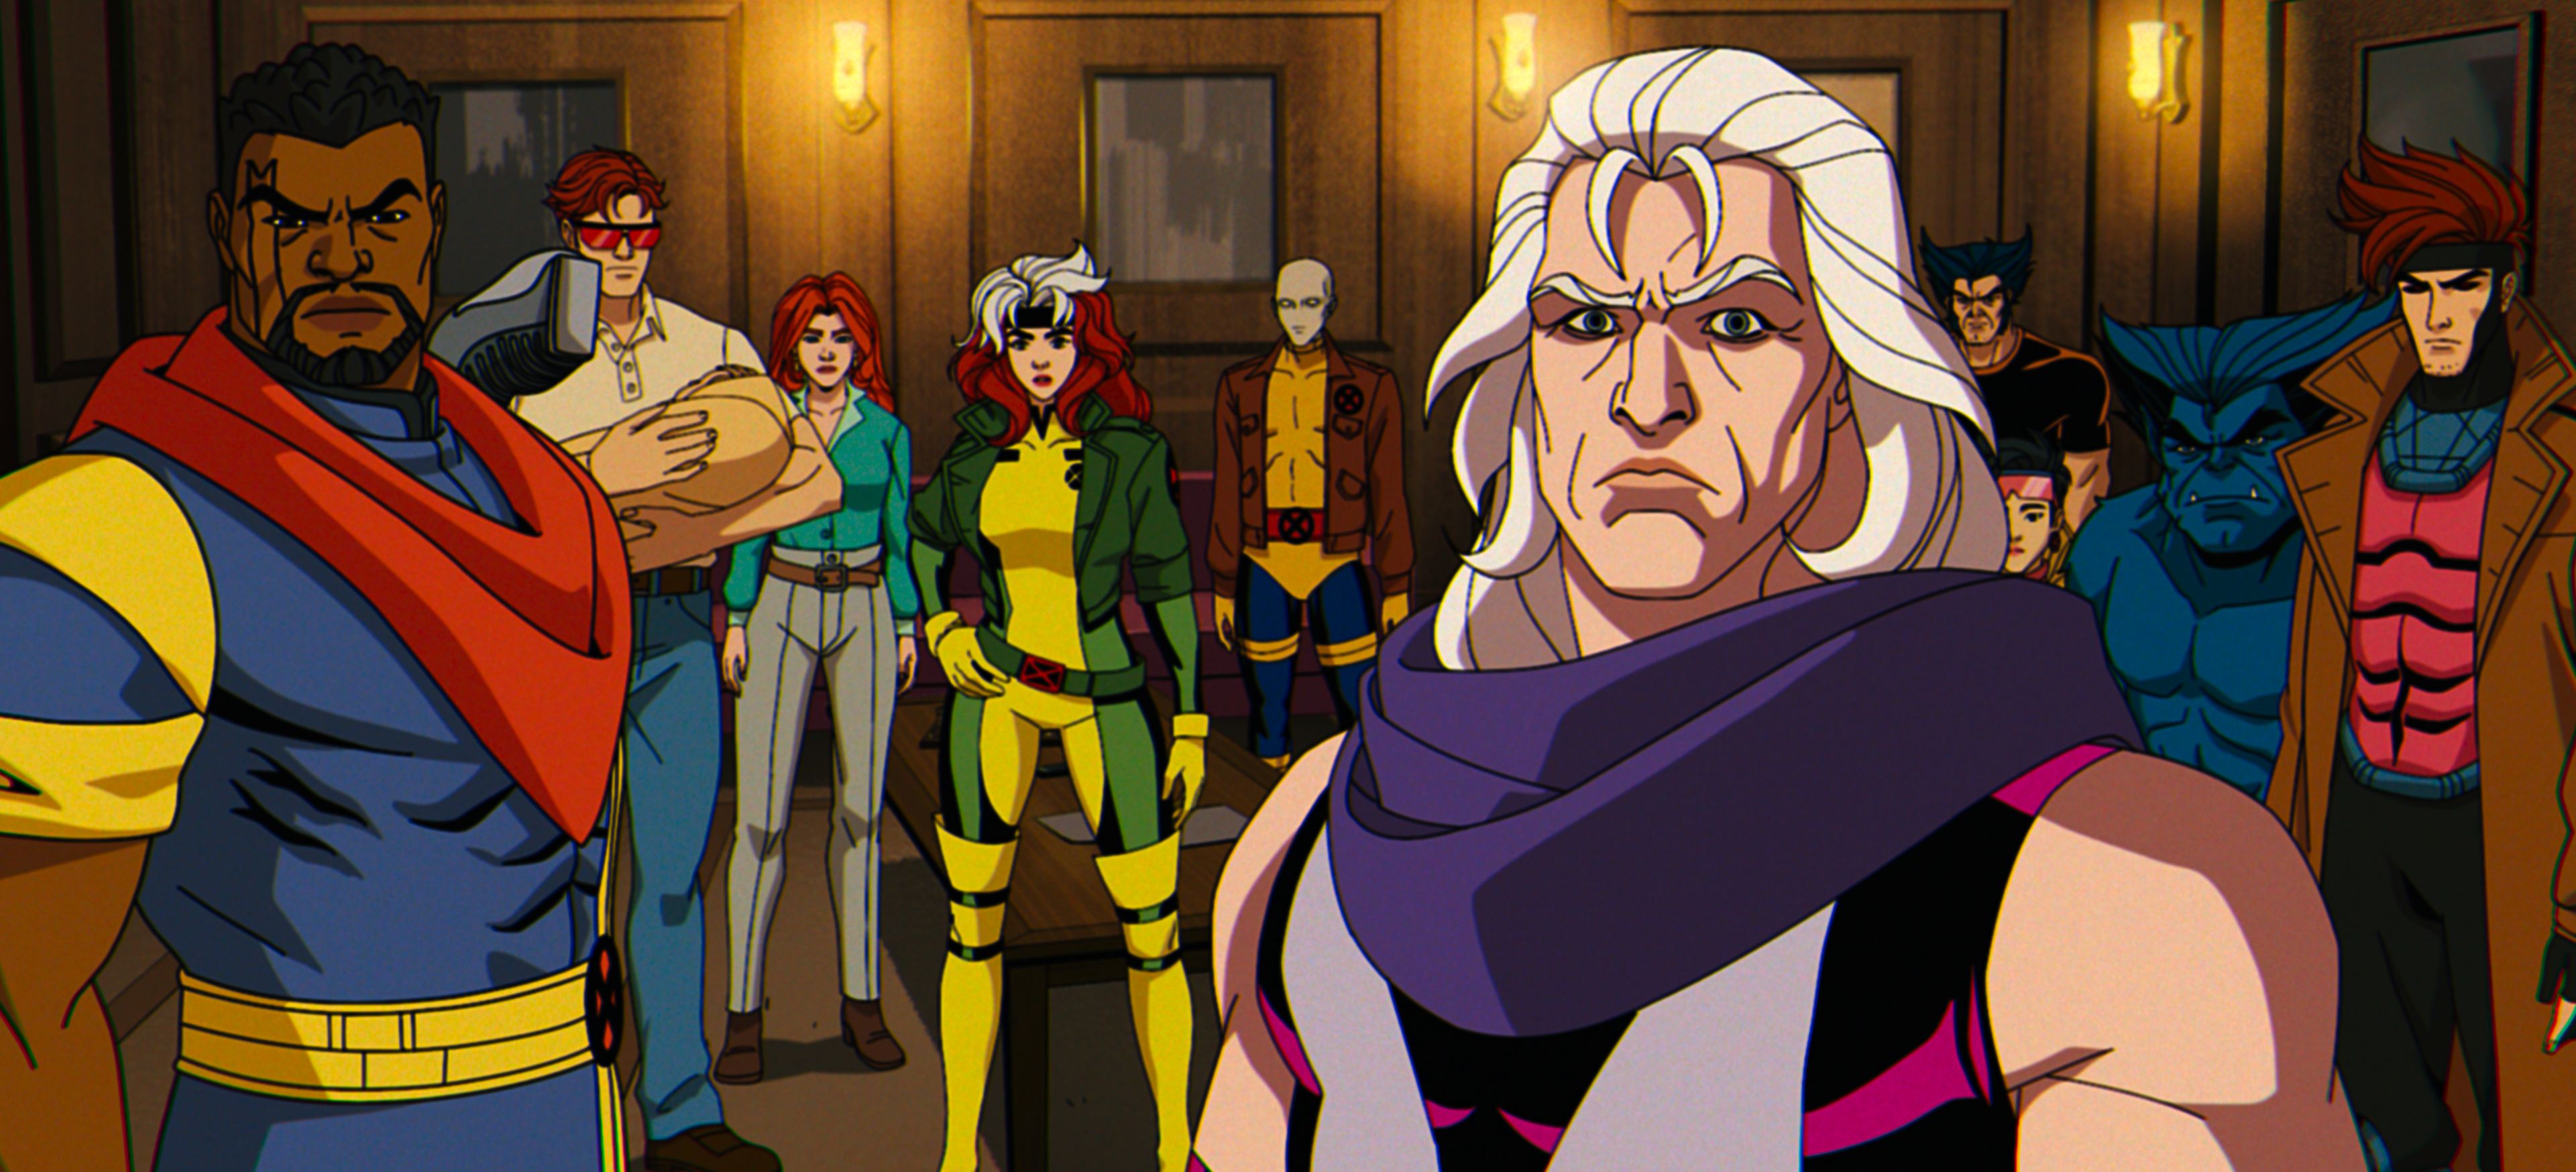 Magneto, with flowing white hair, wears a purple cowl-necked ensemble. His team of mutant superheroes stand behind him, wearing fitted outfits.